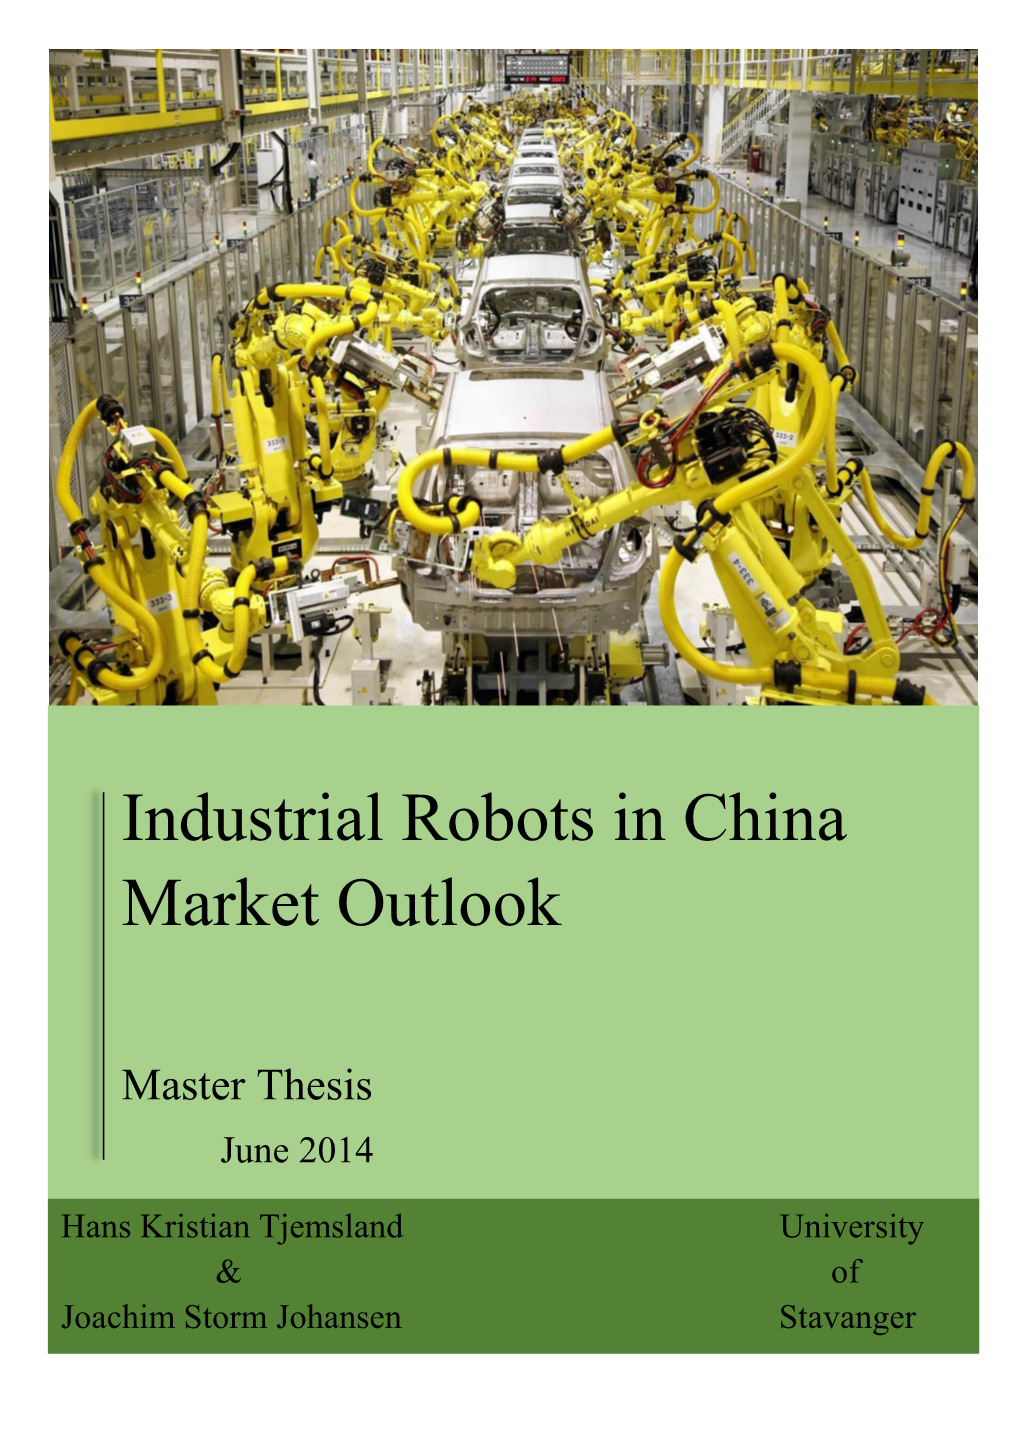 Industrial Robots in China Market Outlook